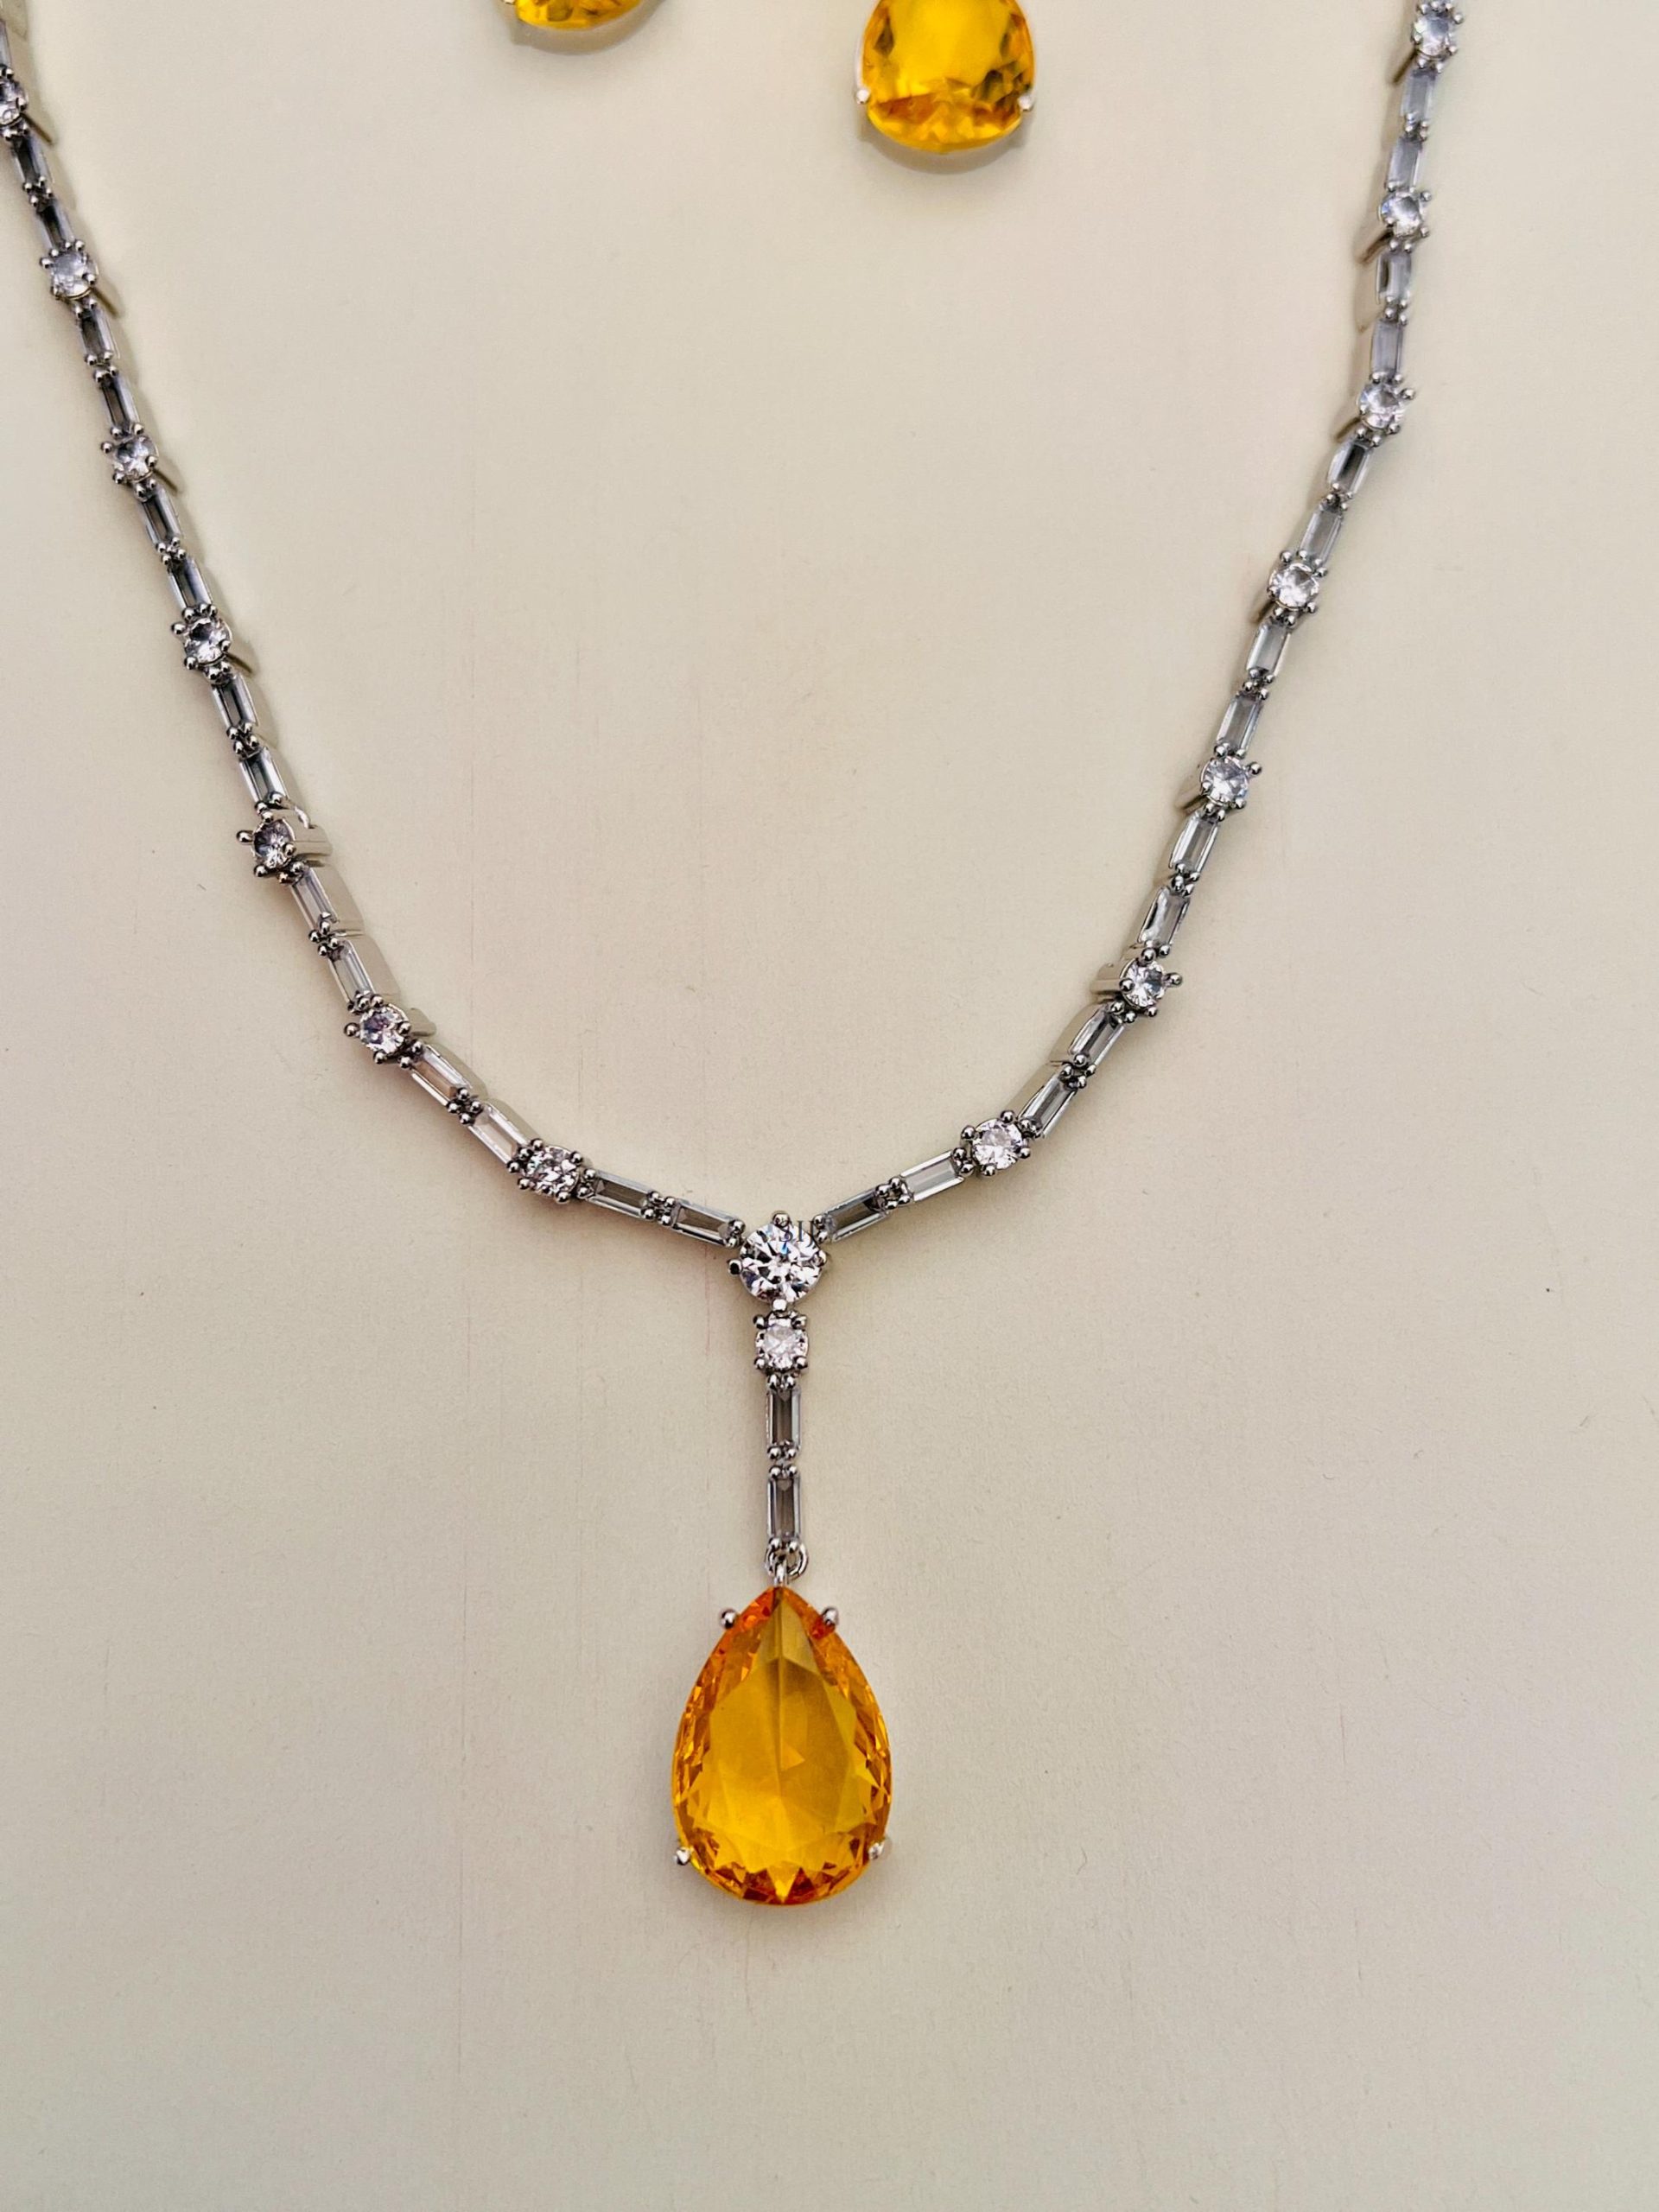 Yellow Stone Tear Drop Pendant with Silver Plated AD Stones Chain